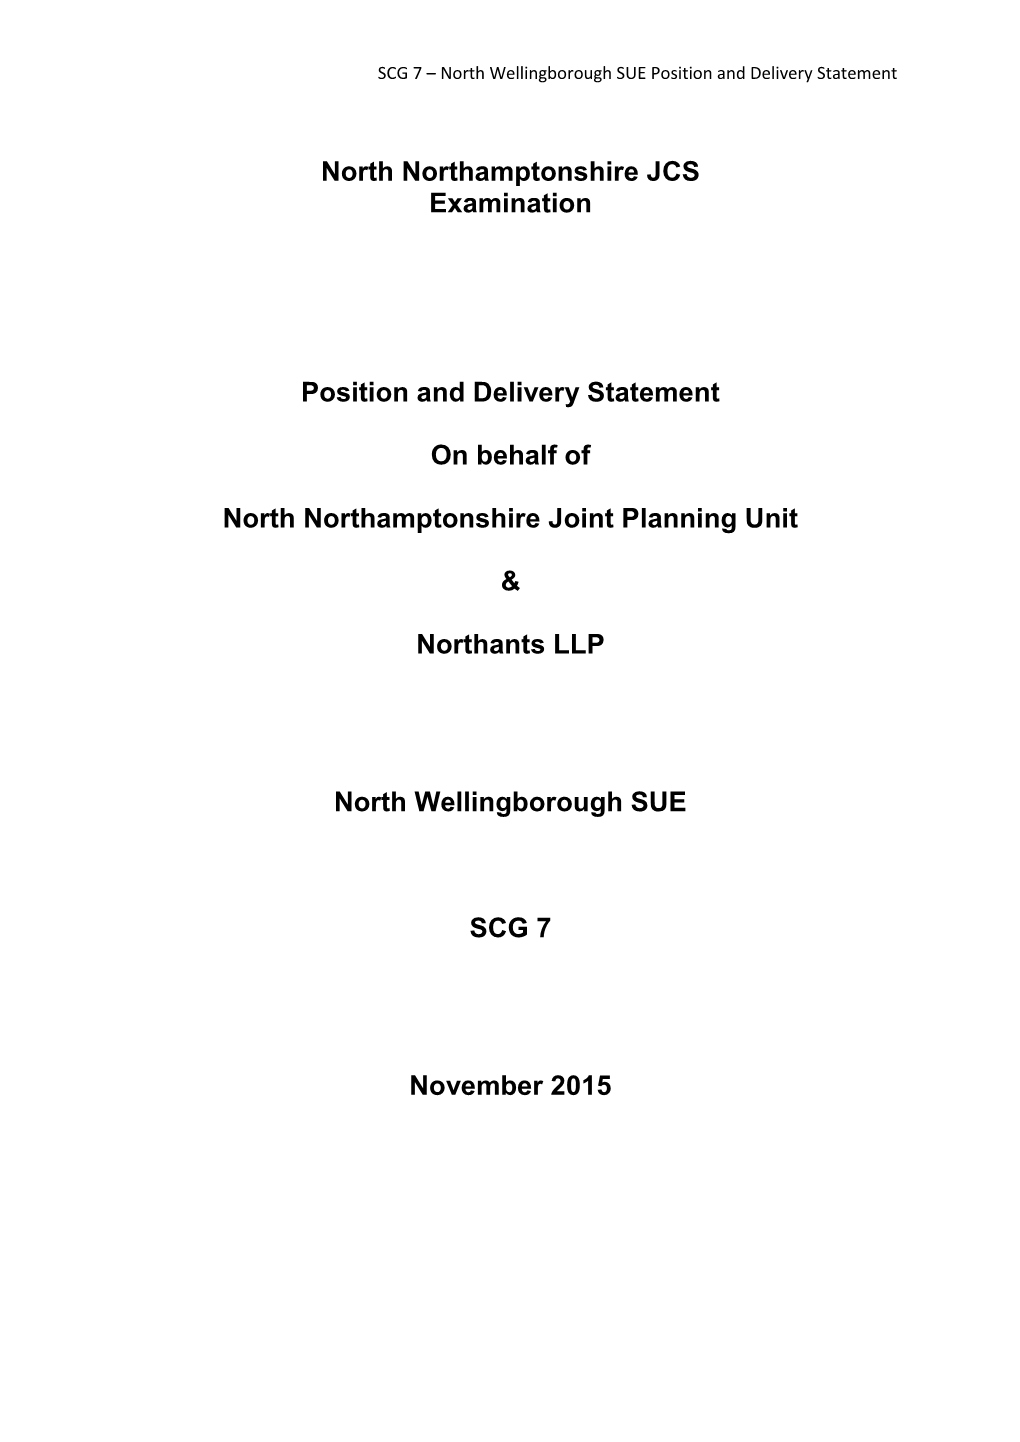 Wellingborough North Joint Position Statement- November 2015